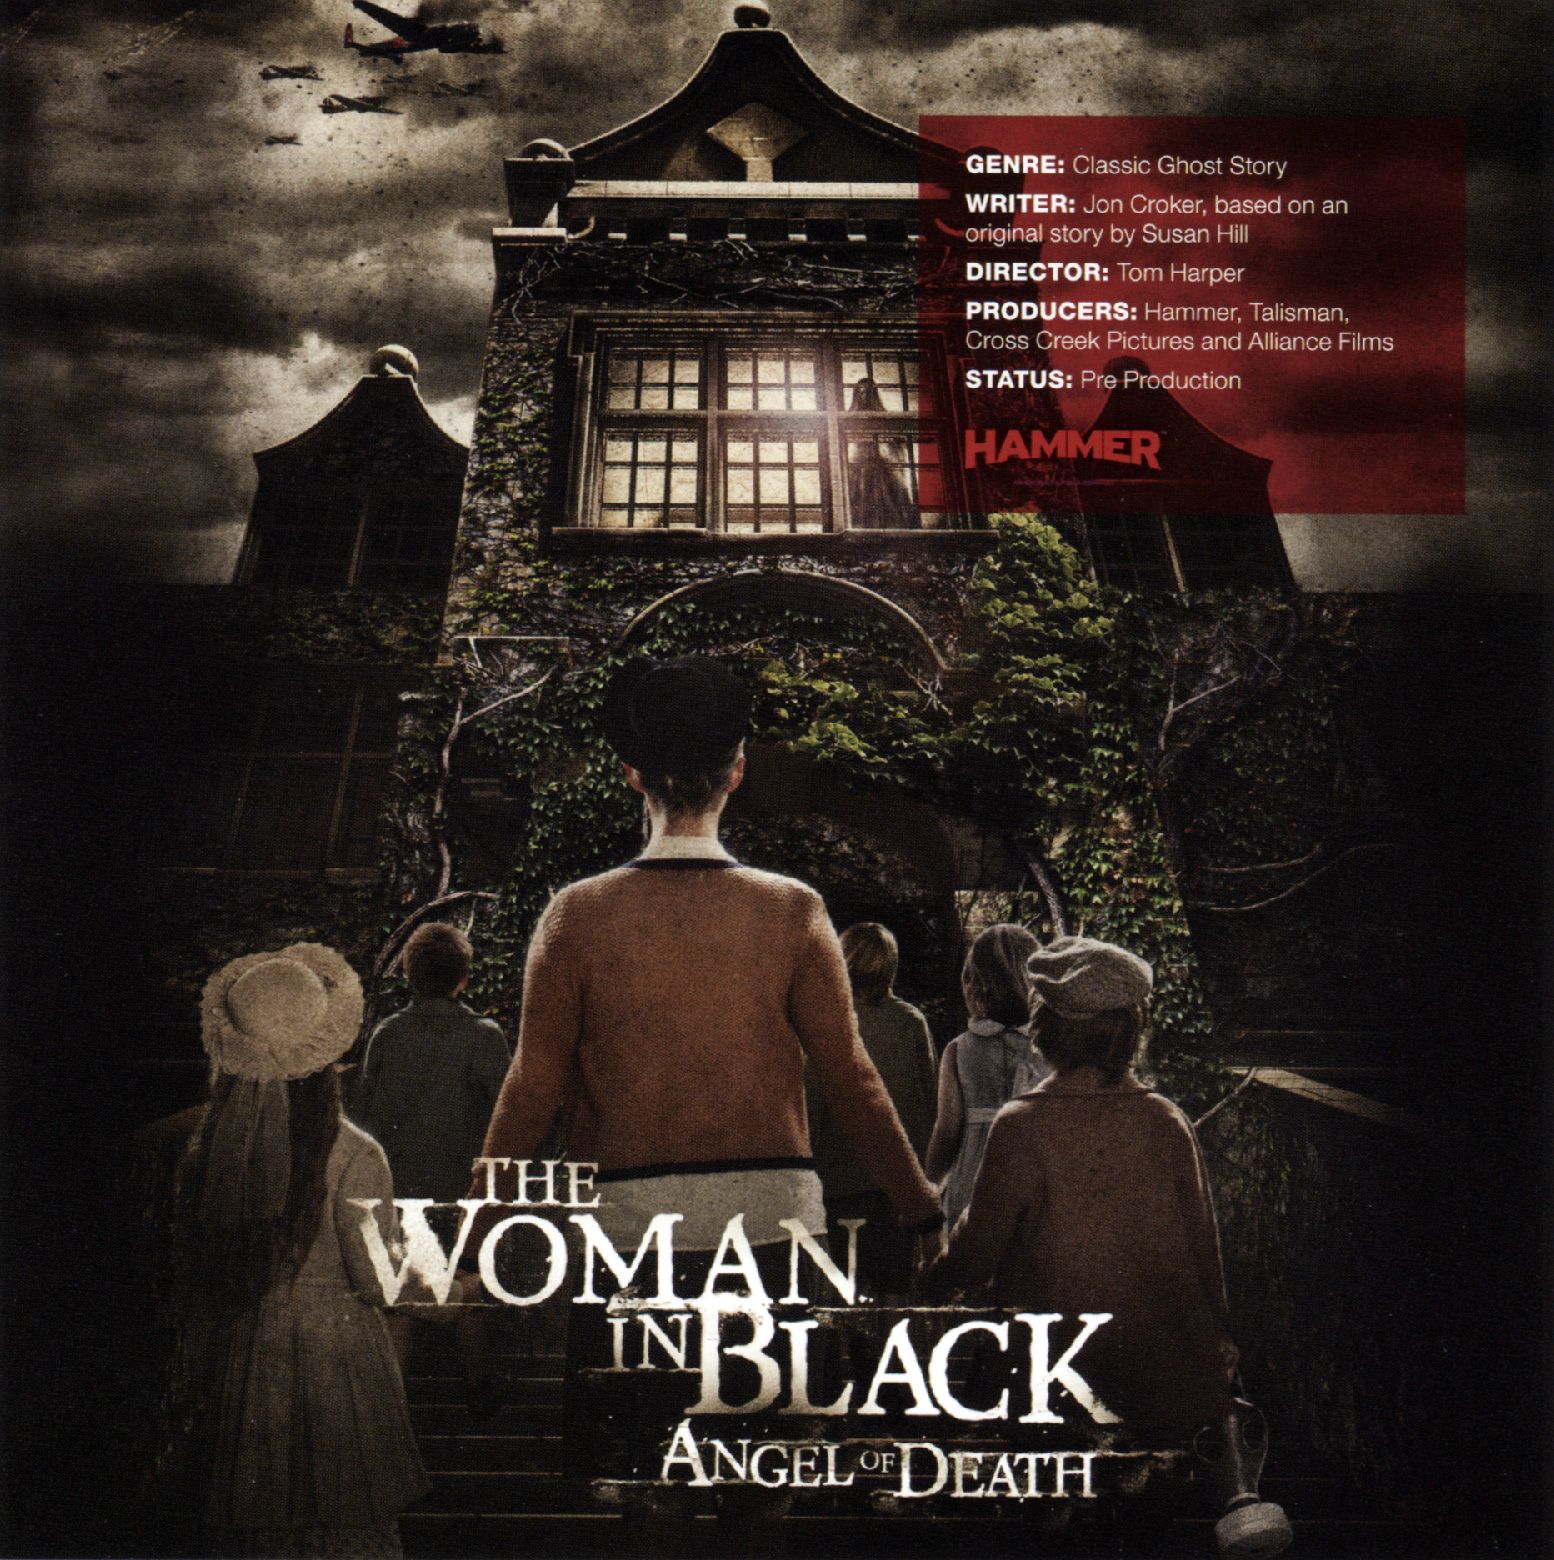 The Woman in Black: Angels of Death Promo Art